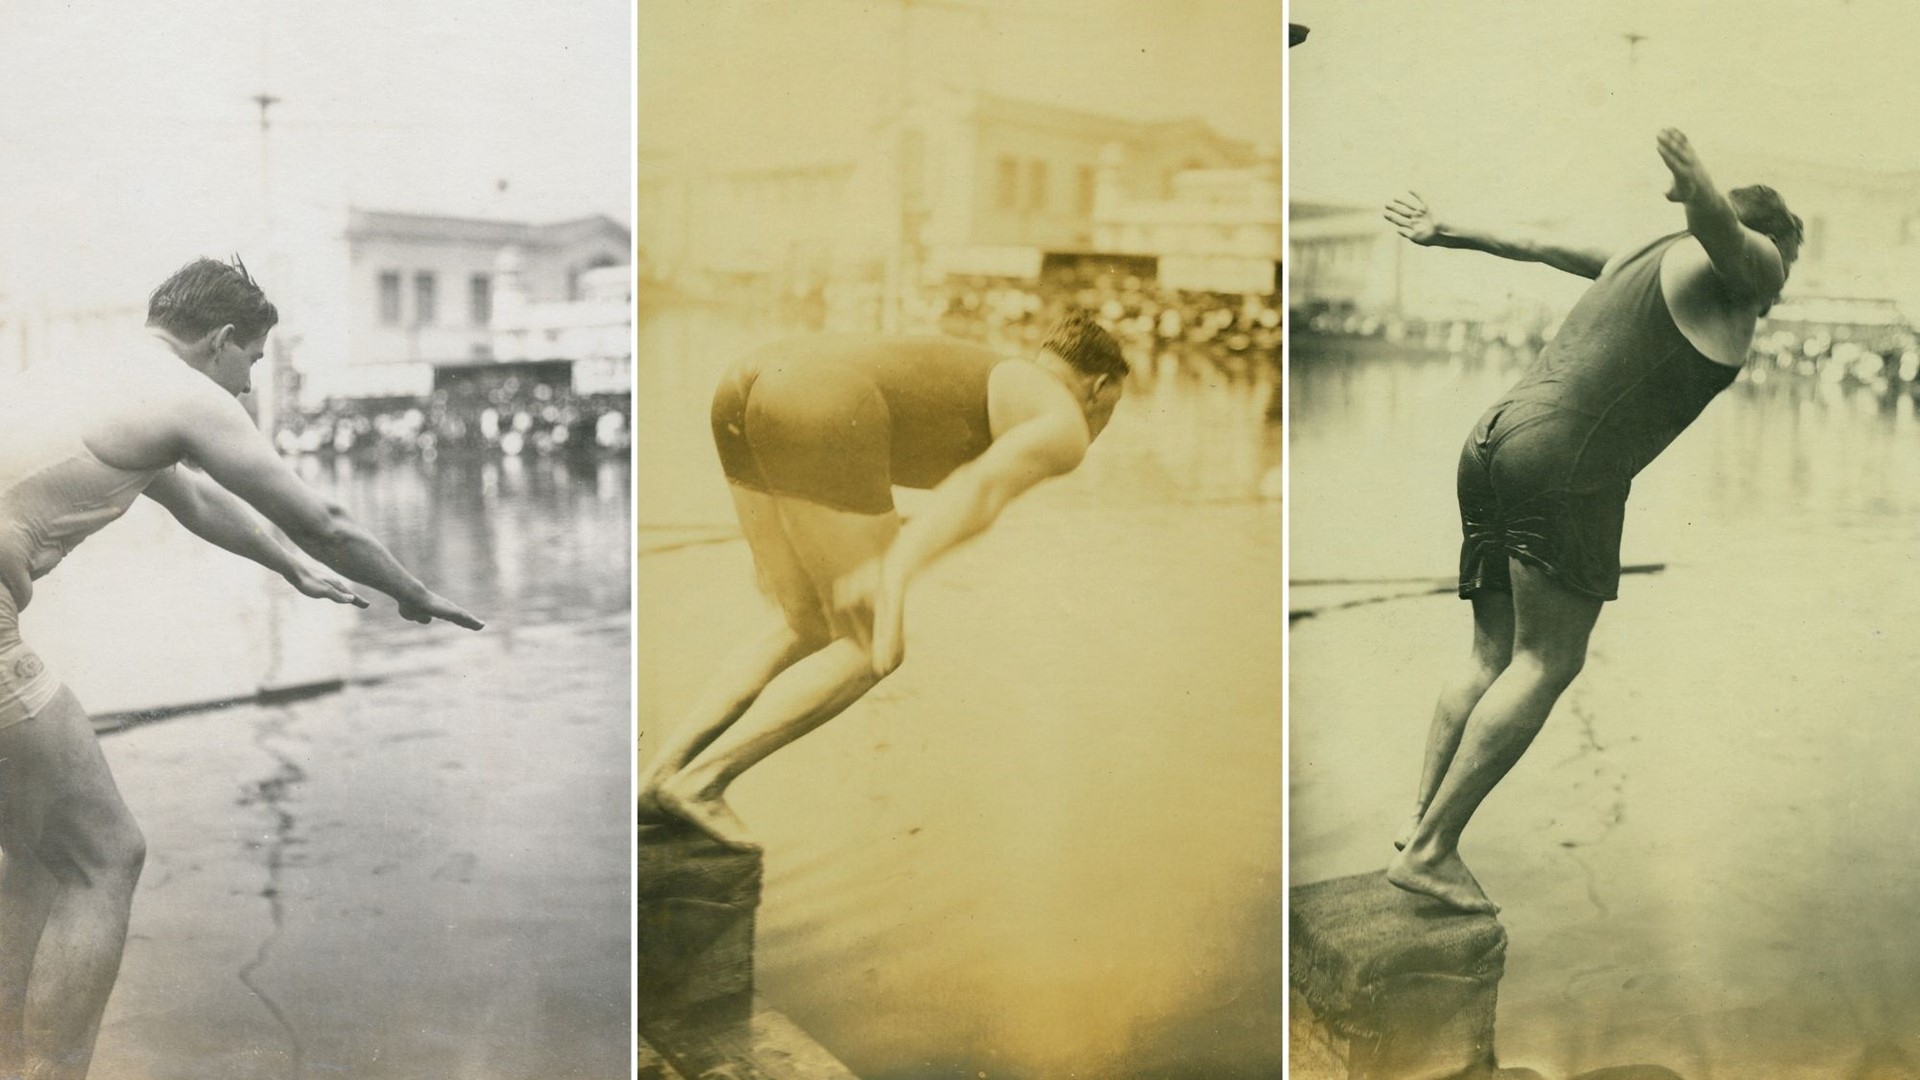 The sport dates back to the late 1800s but is best remembered for being included in the 1904 Summer Olympics in St. Louis